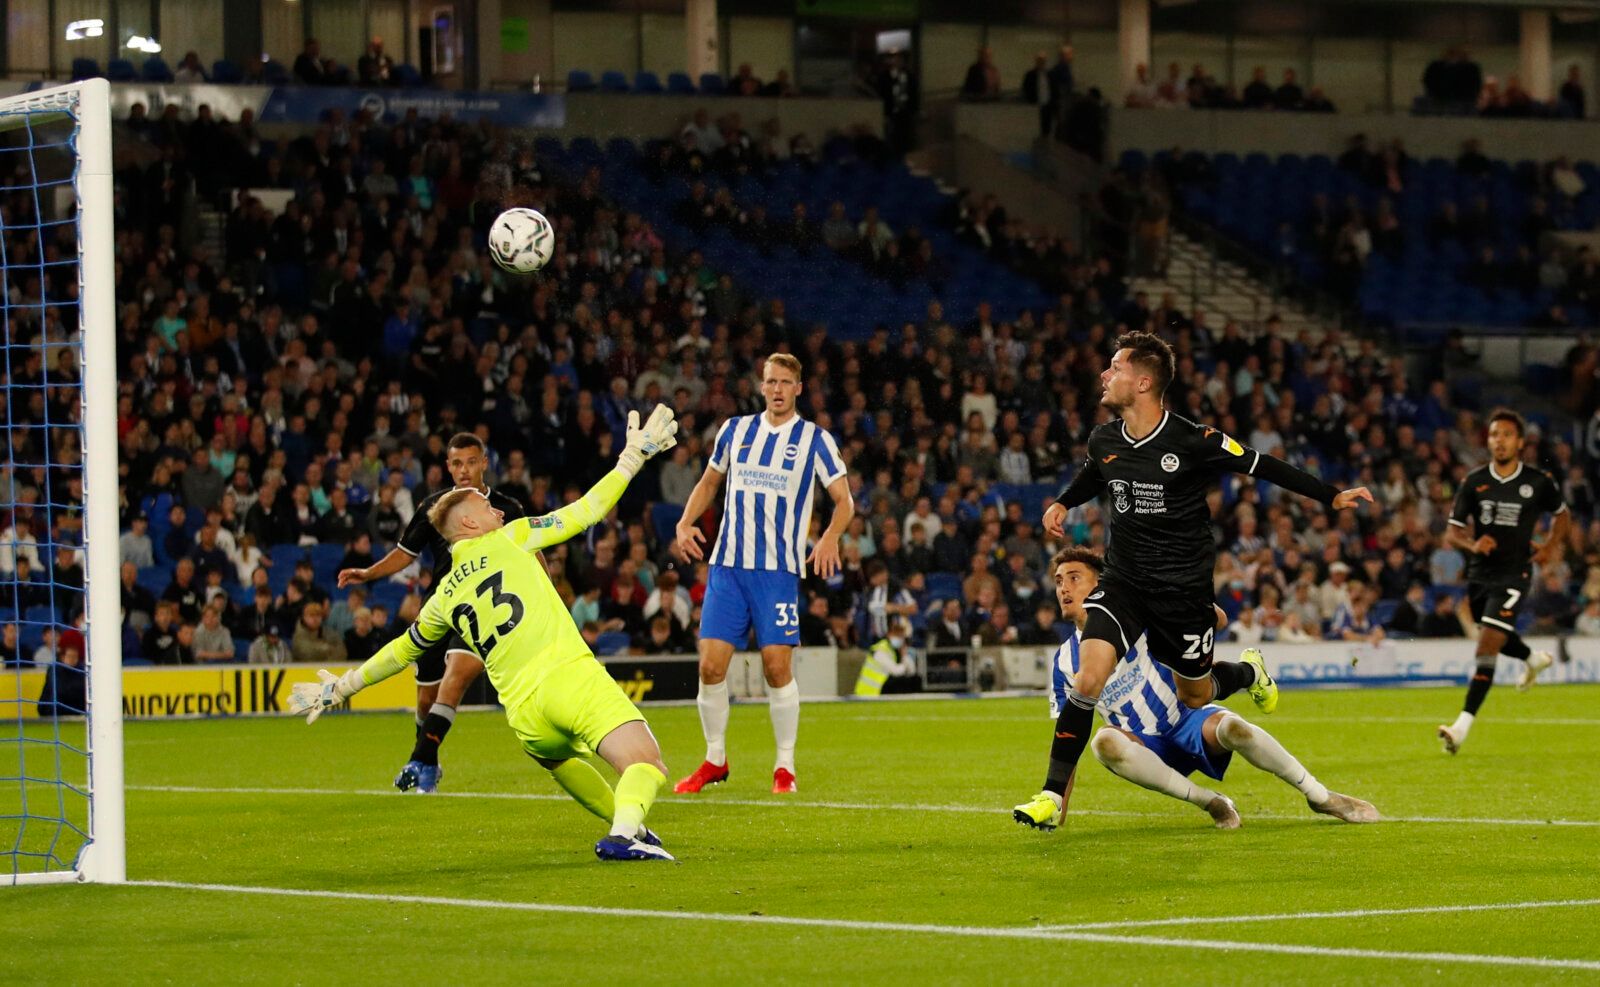 Soccer Football - Carabao Cup - Third Round - Brighton &amp; Hove Albion v Swansea City - The American Express Community Stadium, Brighton, Britain - September 22, 2021 Swansea City's Liam Cullen shoots at goal Action Images via Reuters/Andrew Boyers EDITORIAL USE ONLY. No use with unauthorized audio, video, data, fixture lists, club/league logos or 'live' services. Online in-match use limited to 75 images, no video emulation. No use in betting, games or single club /league/player publications. 